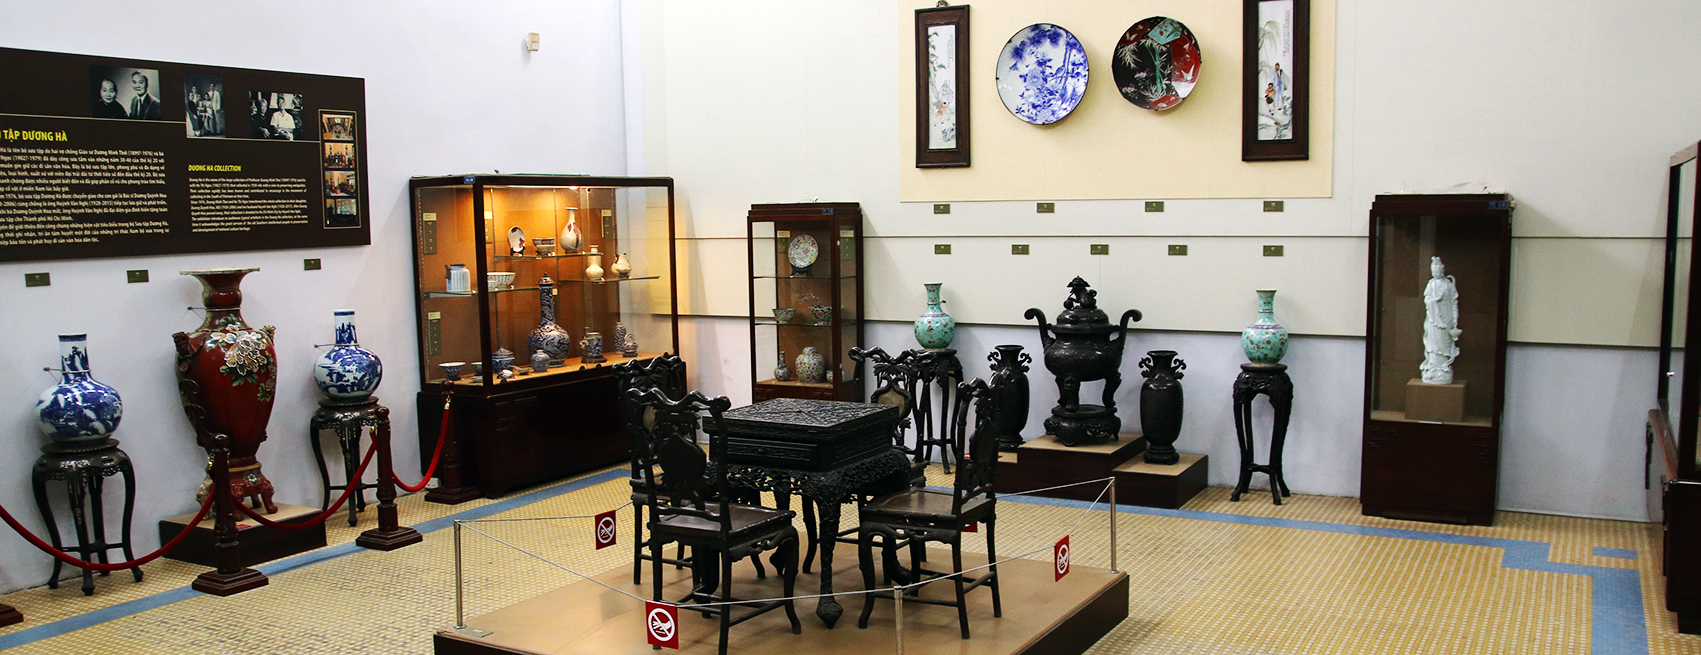 Duong Ha Collection at the History Museum of Hồ Chí Minh City